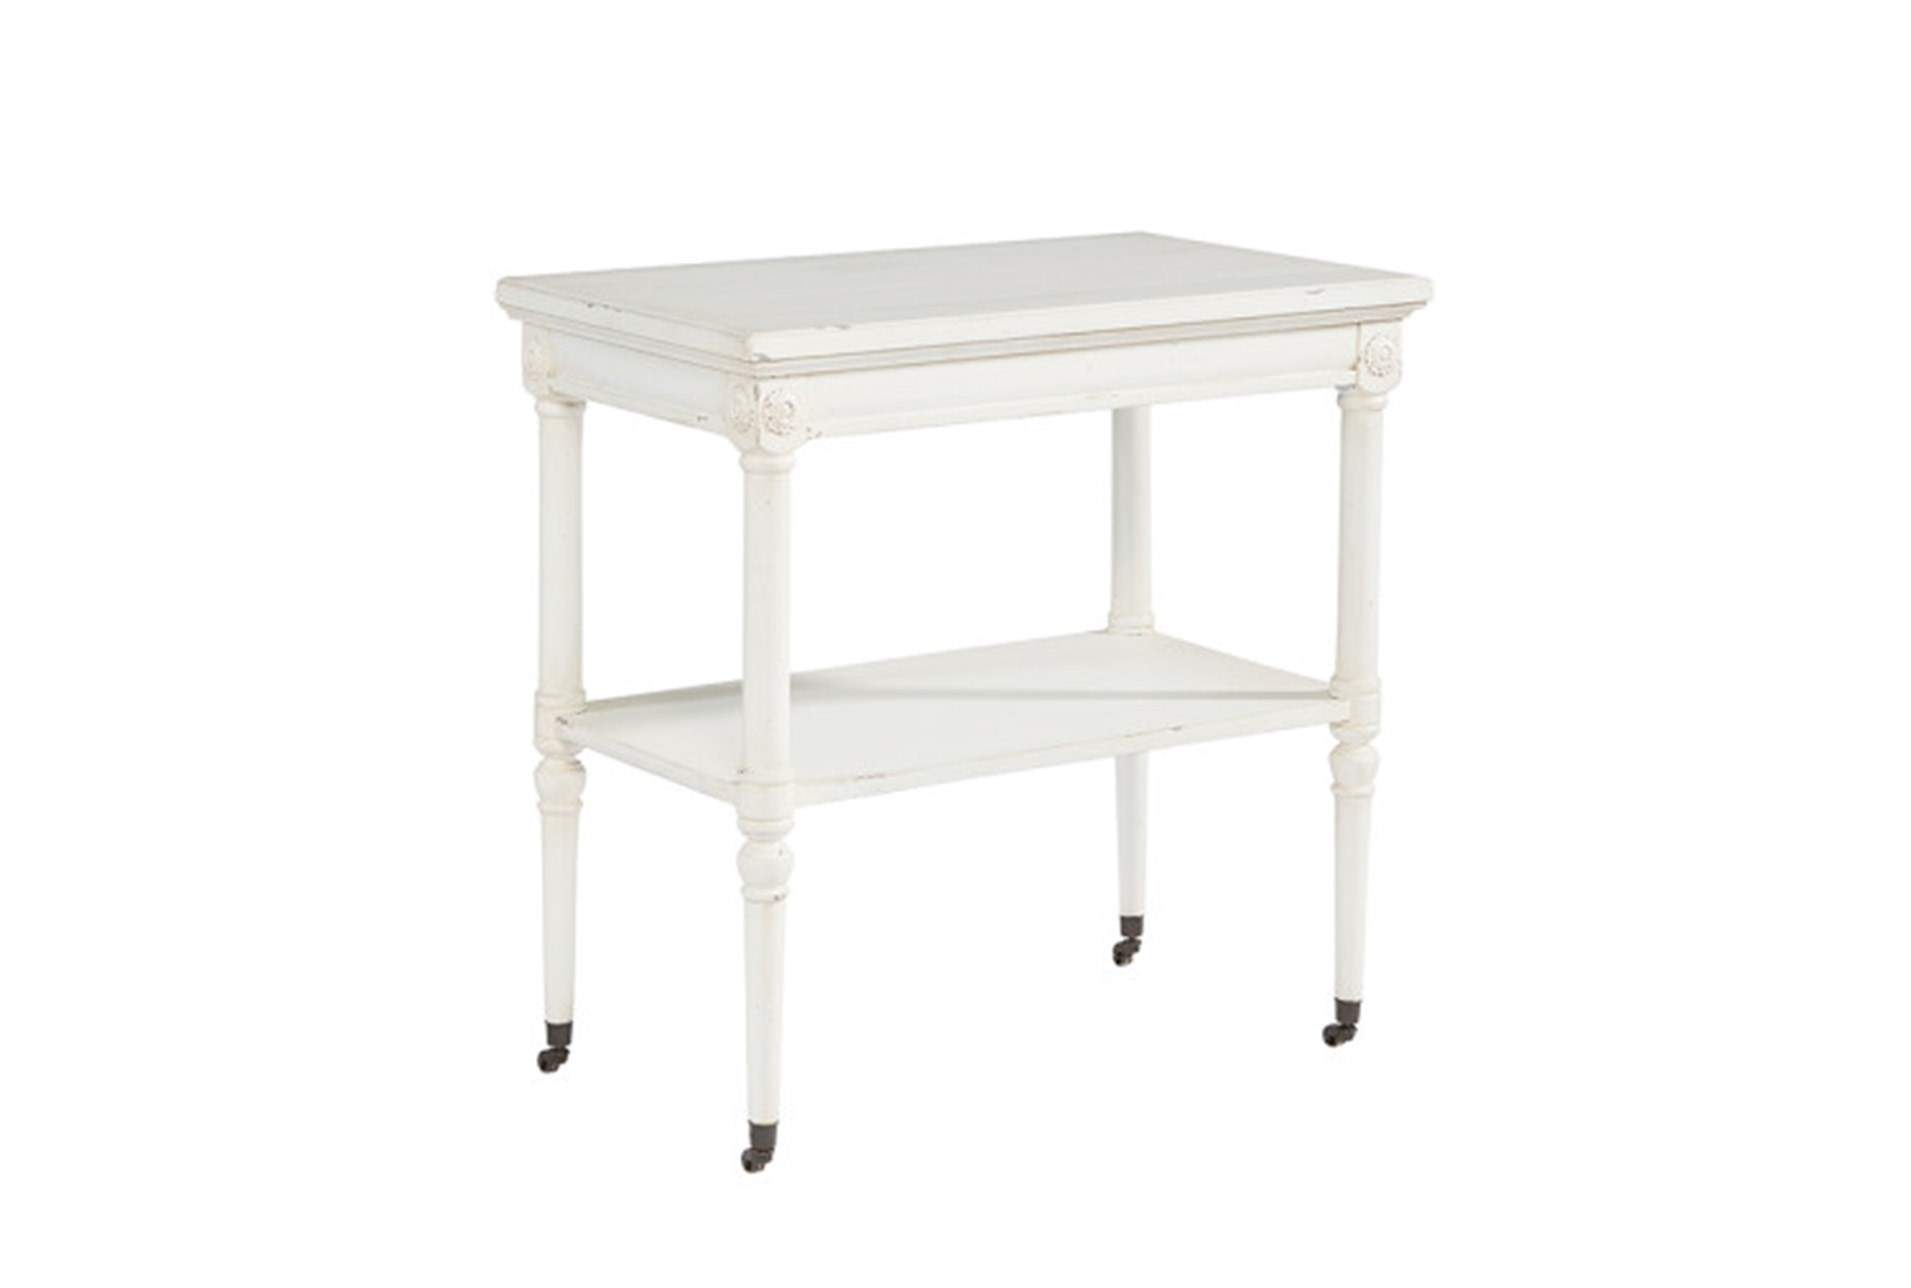 magnolia home petite rosette white accent table joanna gaines jules small qty has been successfully your cart pottery barn farm dining trestle style kitchen coffee set mid century